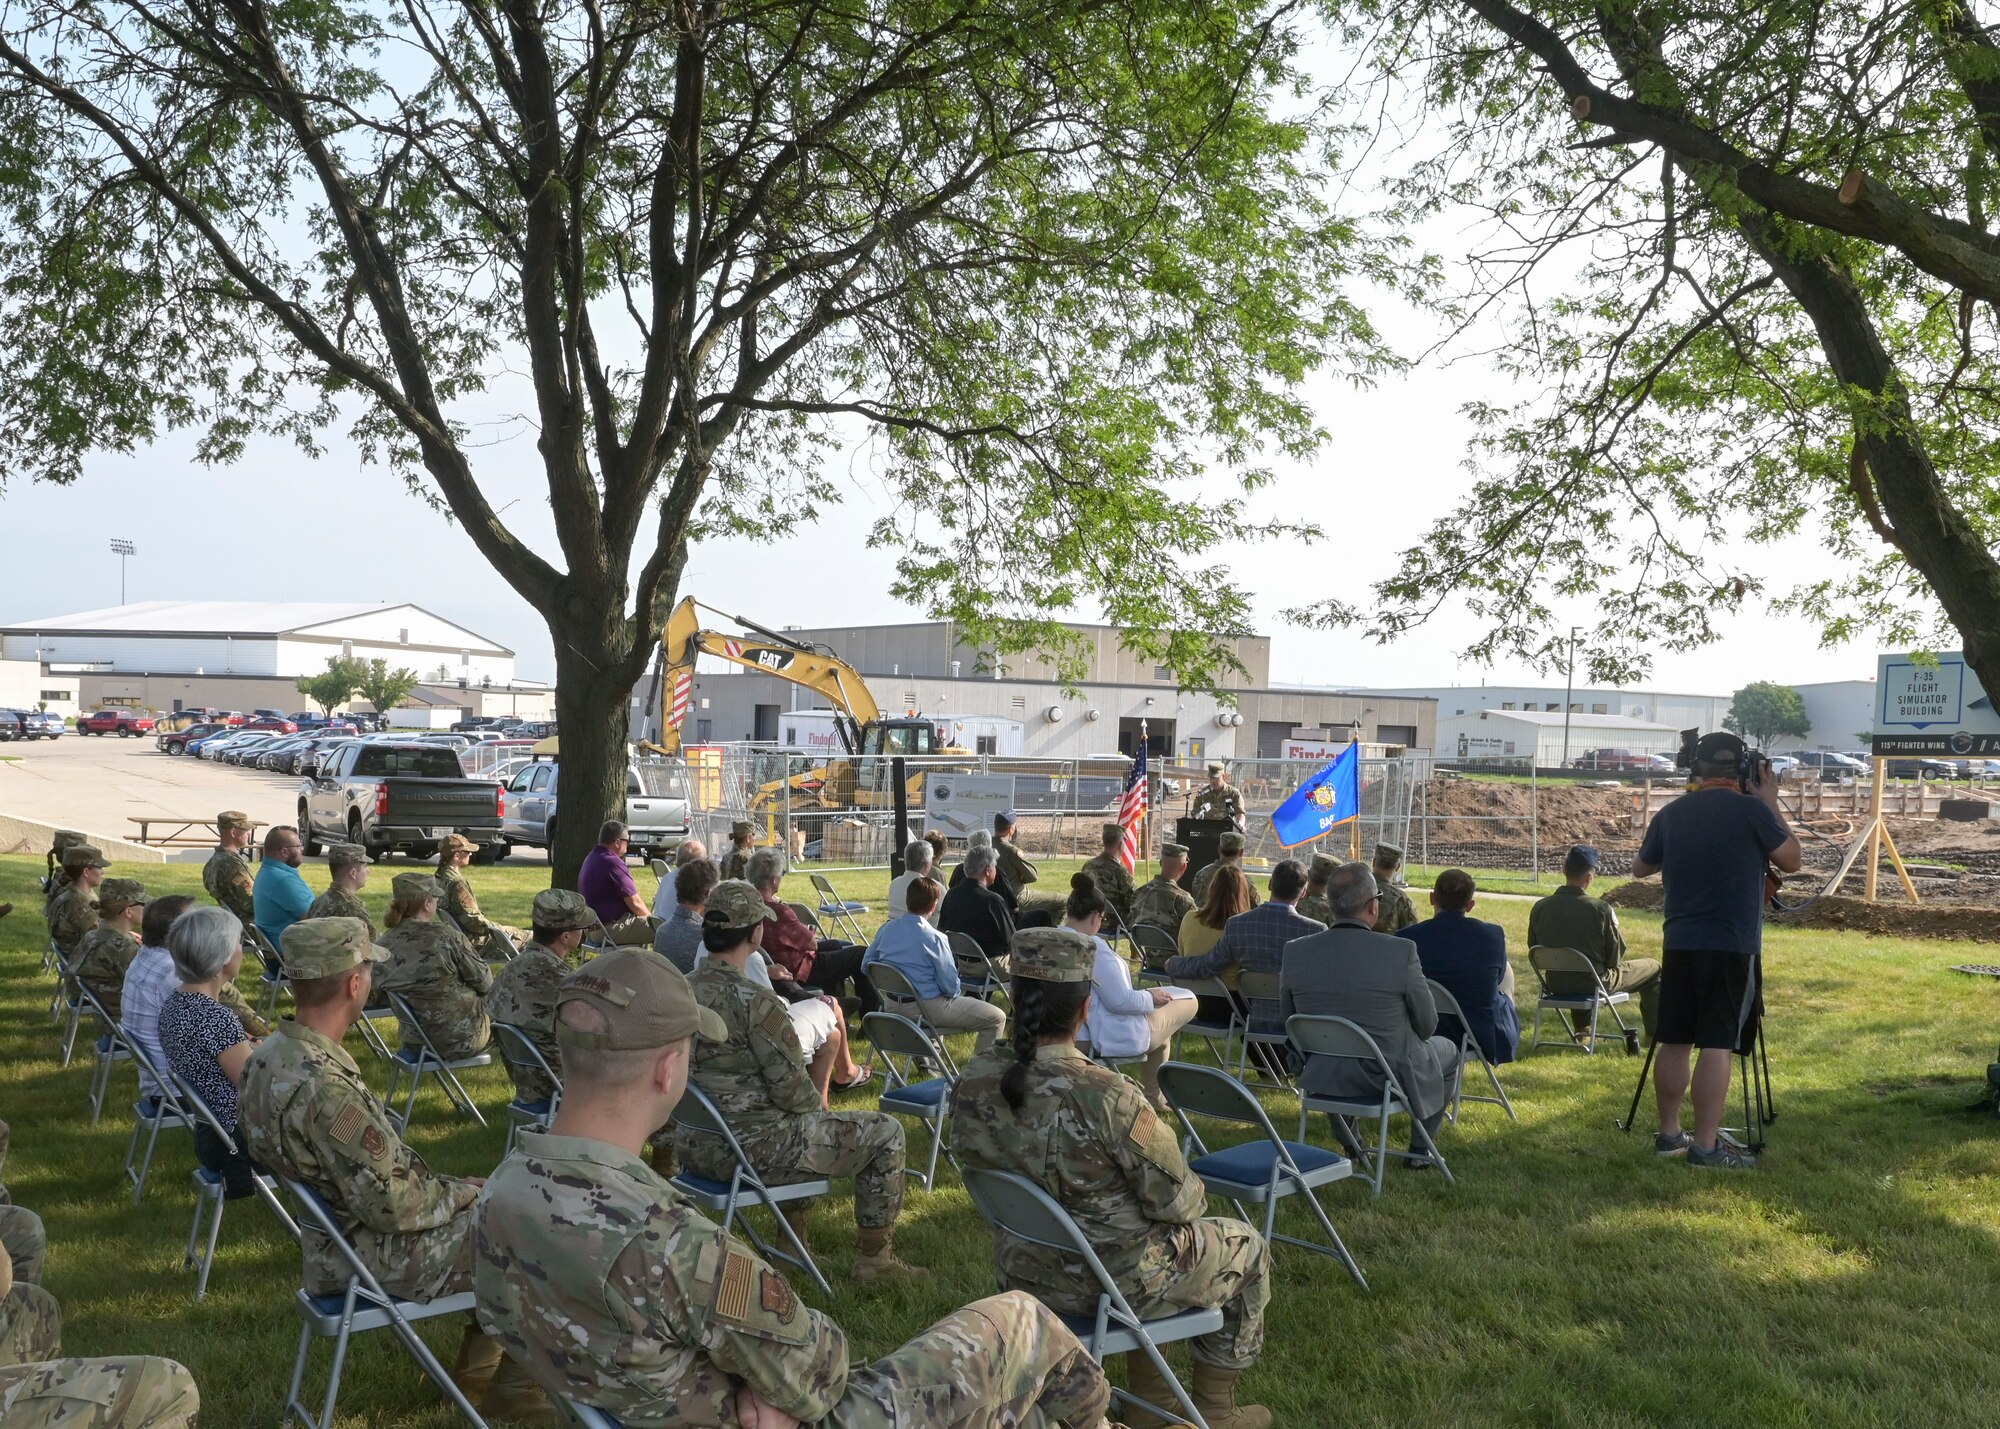 The Wisconsin Air National Guard’s 115th Fighter Wing holds a breaking ground ceremony on its first major F-35 project Aug. 11, 2021 at Truax Field. The ceremony brought together military and civilian leadership to commemorate the future of the Madison unit as the selected beddown site of the F-35 Lightning II aircraft. (U.S. Air National Guard photo by Staff Sgt. Cameron Lewis)